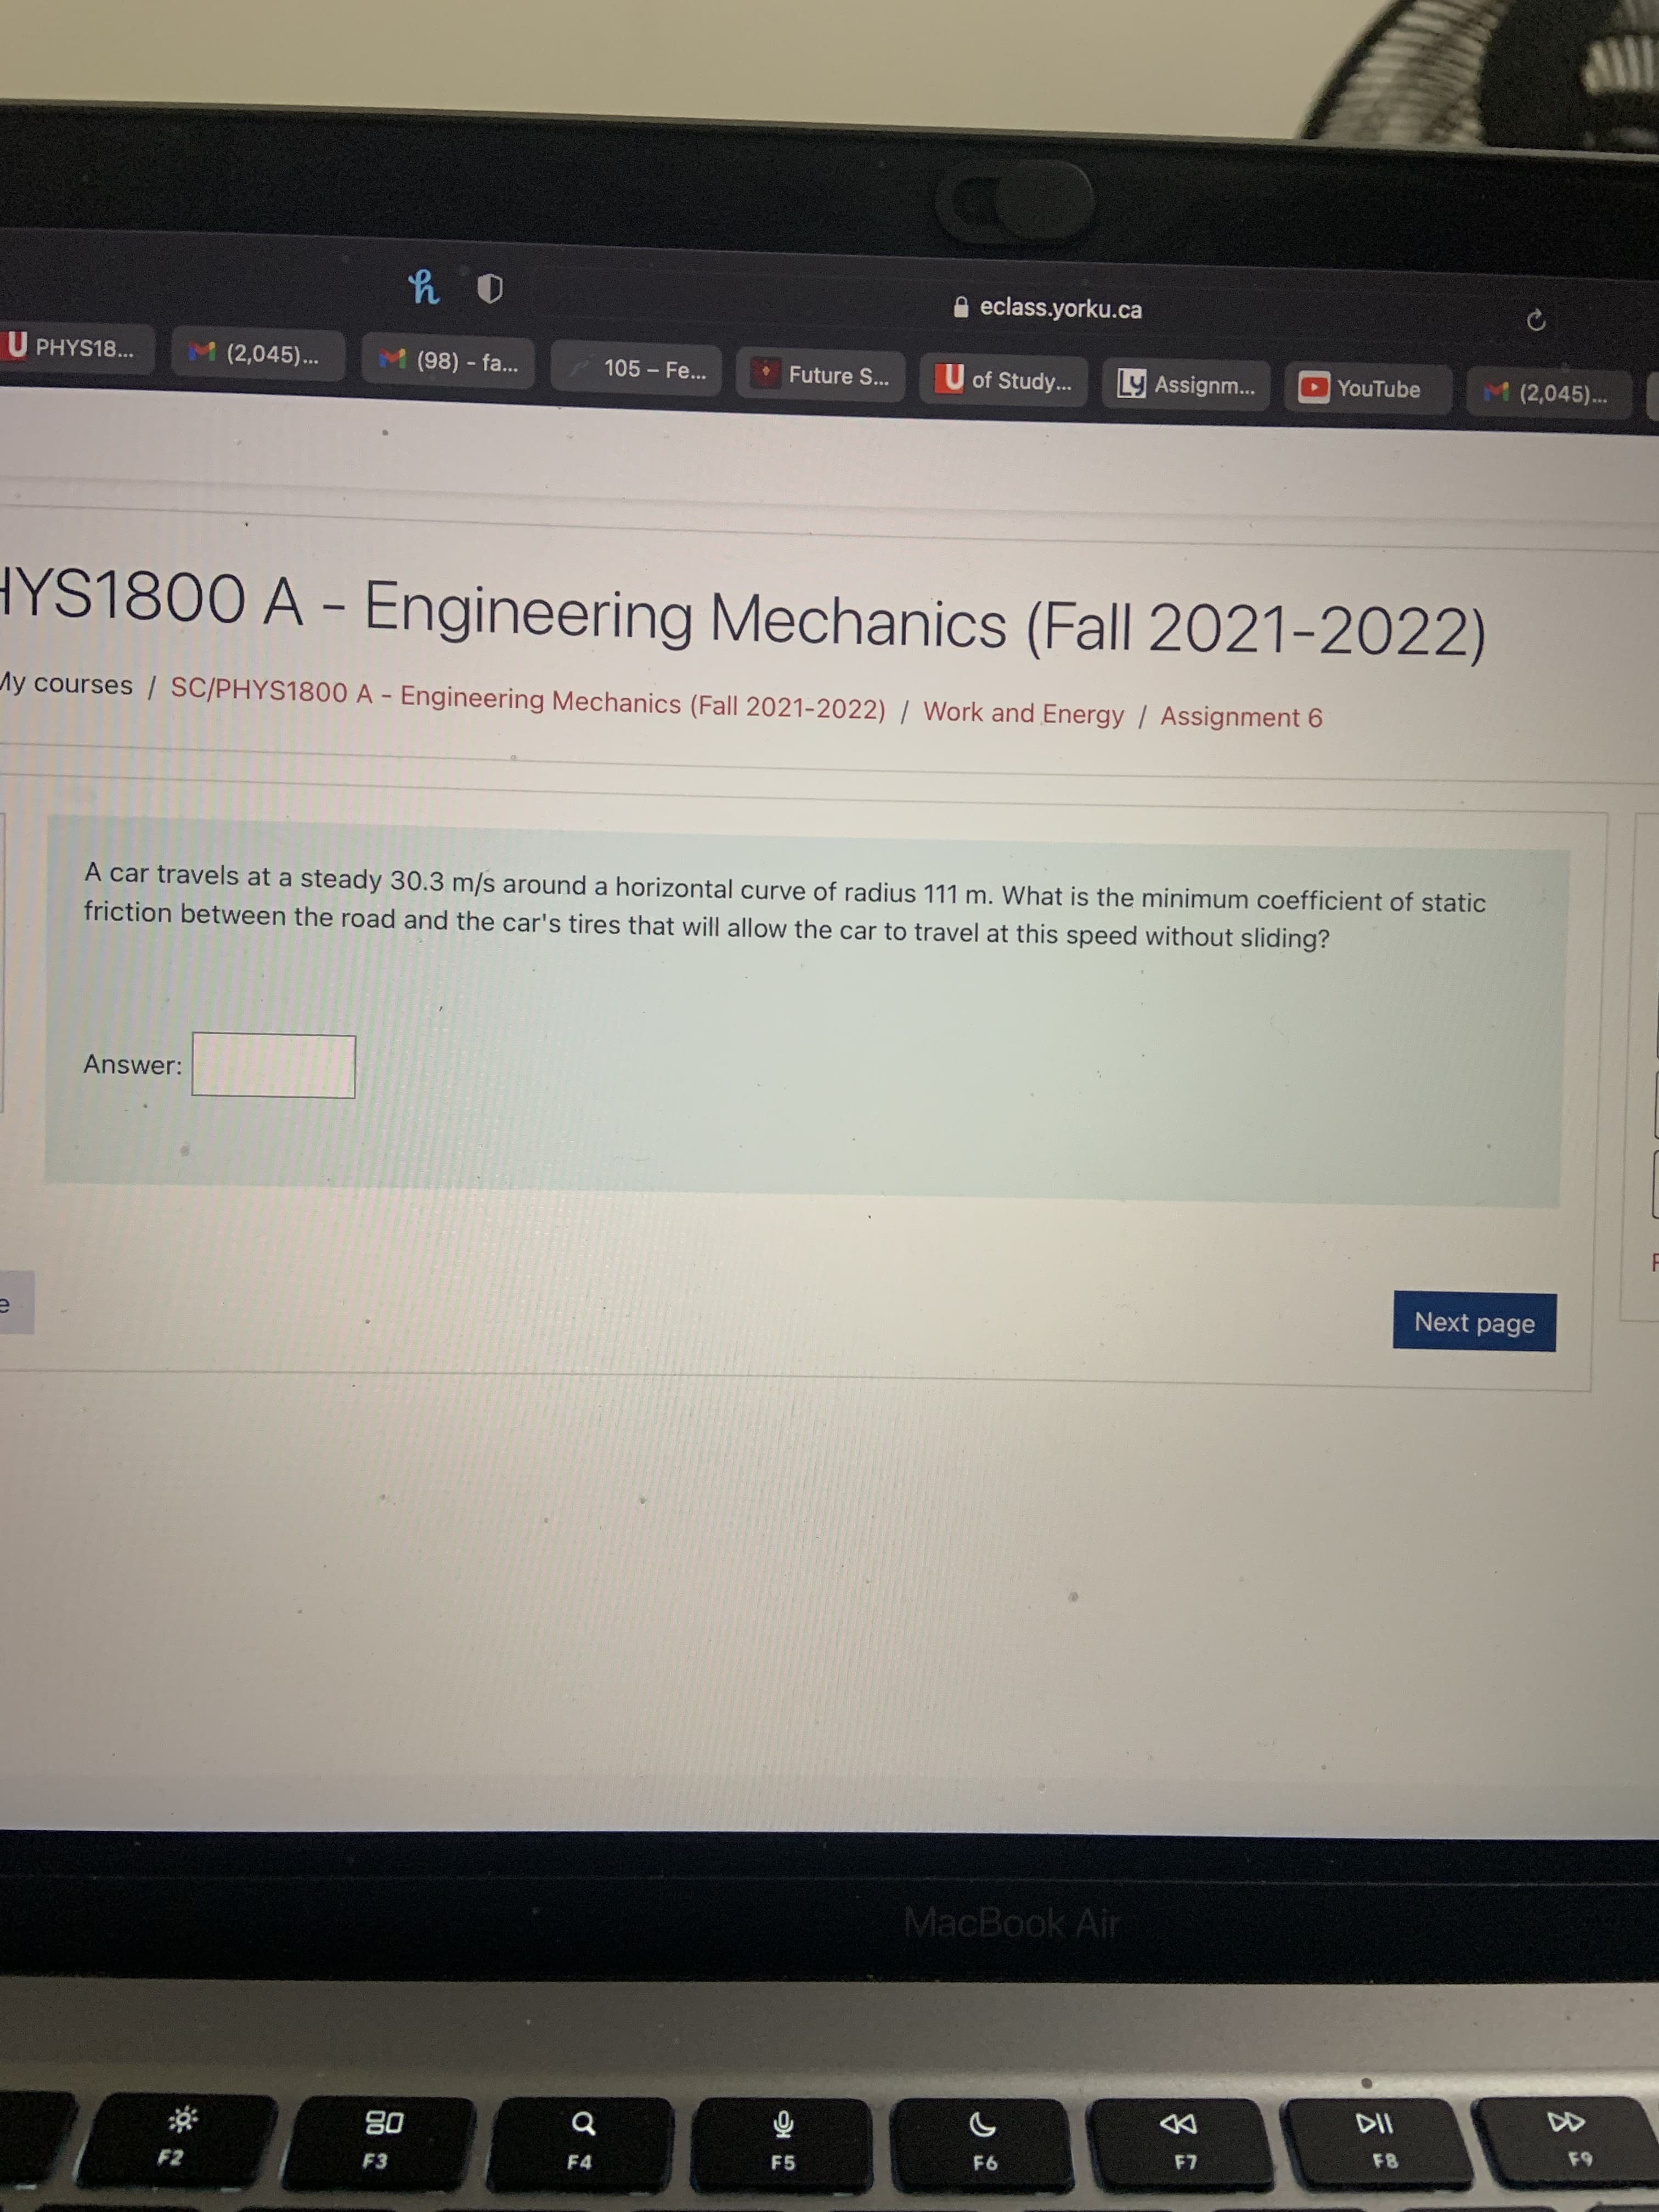 云2
A eclass.yorku.ca
U PHYS18...
M (2,045)...
M(98) - fa..
105-Fe...
Future S. U of Study...
Ly Assignm...
YouTube
M(2,045)...
HYS1800 A - Engineering Mechanics (Fall 2021-2022)
My courses / SC/PHYS1800 A - Engineering Mechanics (Fall 2021-2022) / Work and Energy / Assignment 6
A car travels at a steady 30.3 m/s around a horizontal curve of radius 111 m. What is the minimum coefficient of static
friction between the road and the car's tires that will allow the car to travel at this speed without sliding?
Answer:
Next page
MacBook Air
DD
08
F3
64
F5
F6
F4
F2
